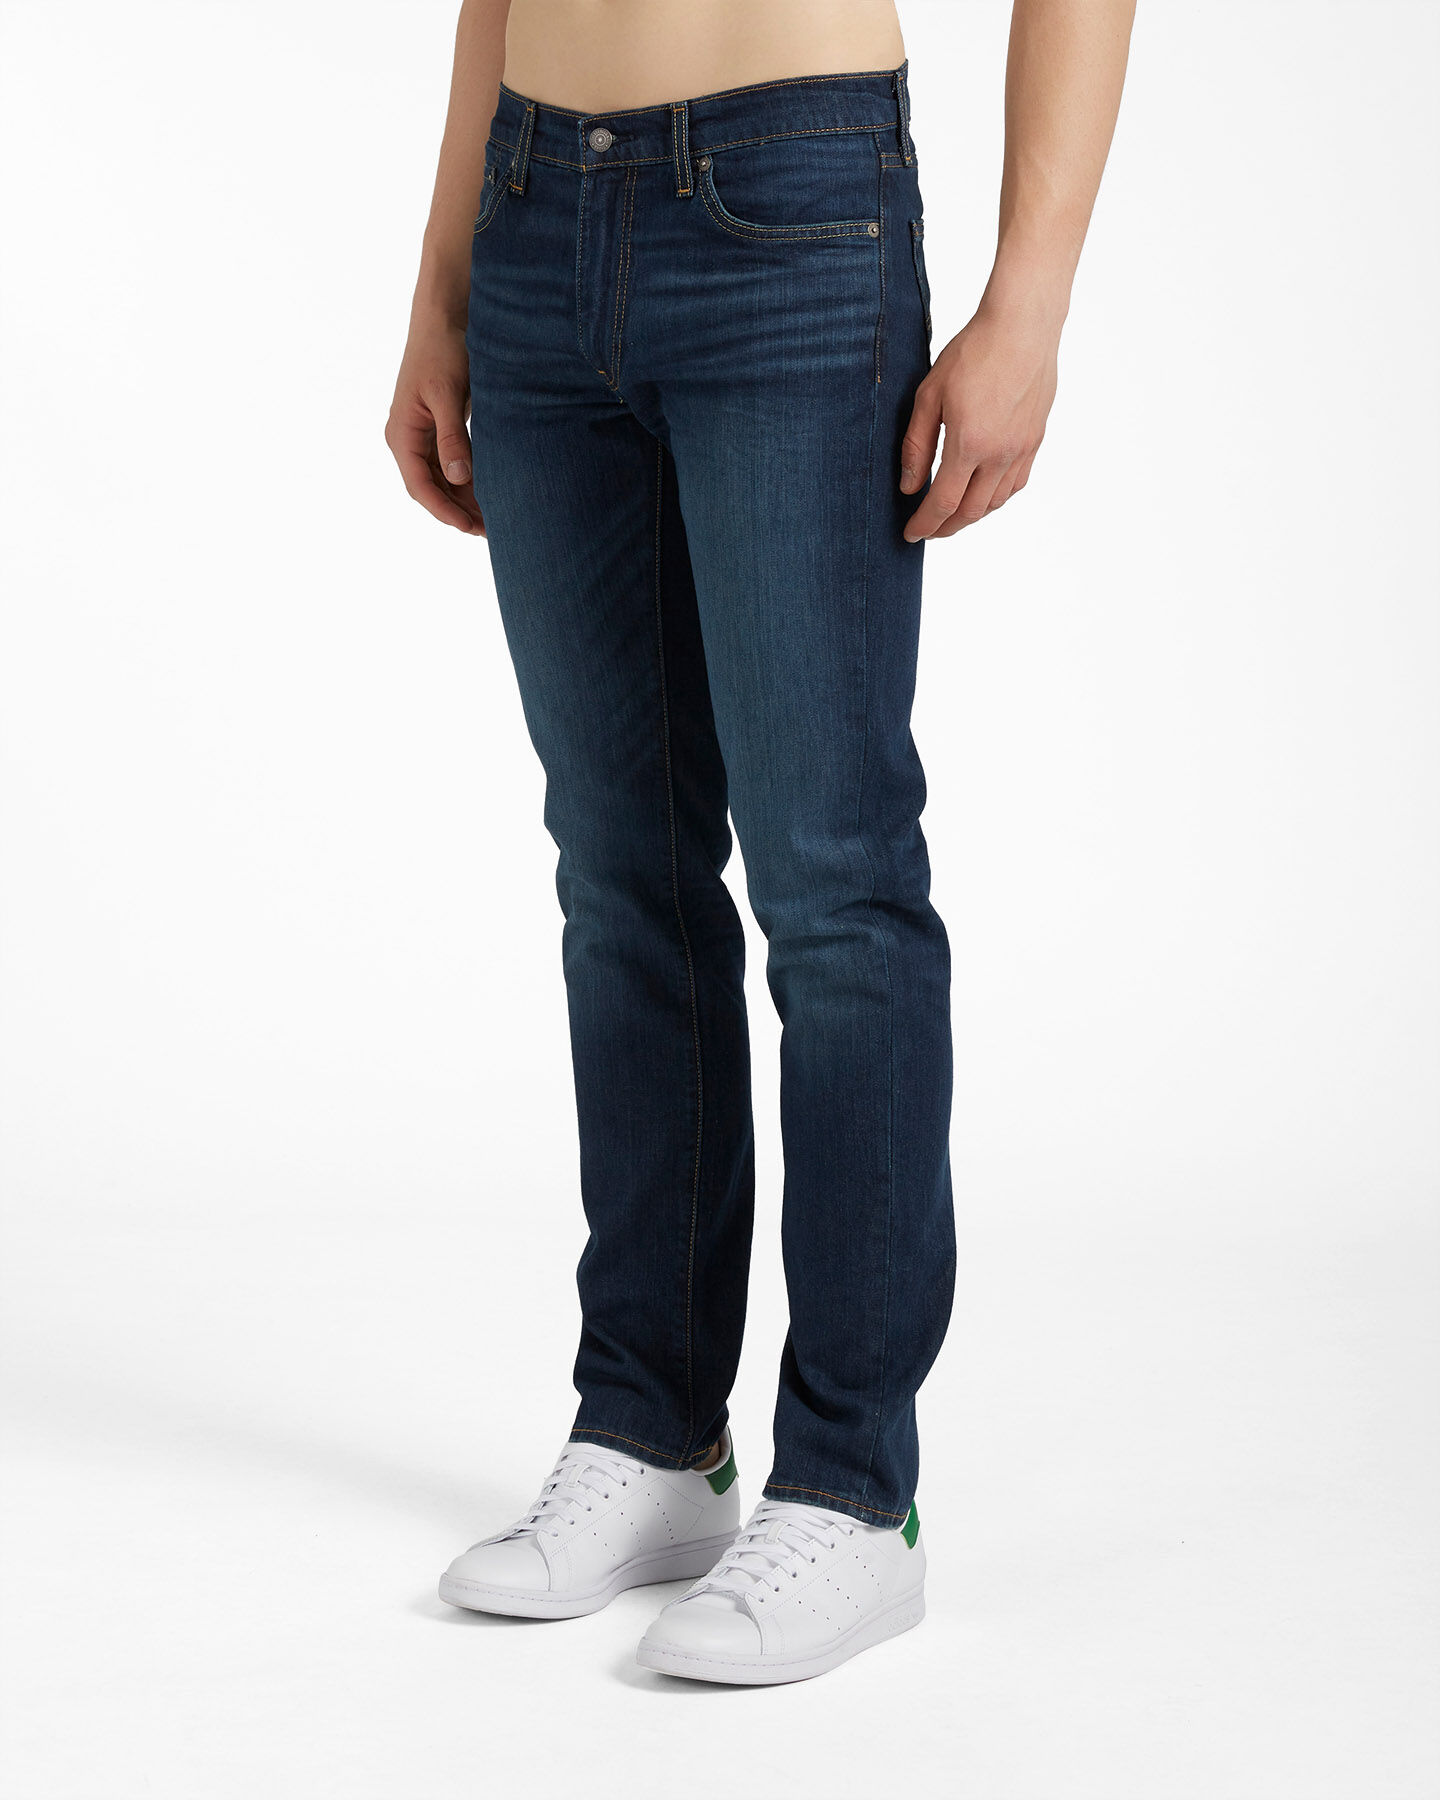  Jeans LEVI'S 511 SLIM FIT  M S4087712|0970|30 scatto 2